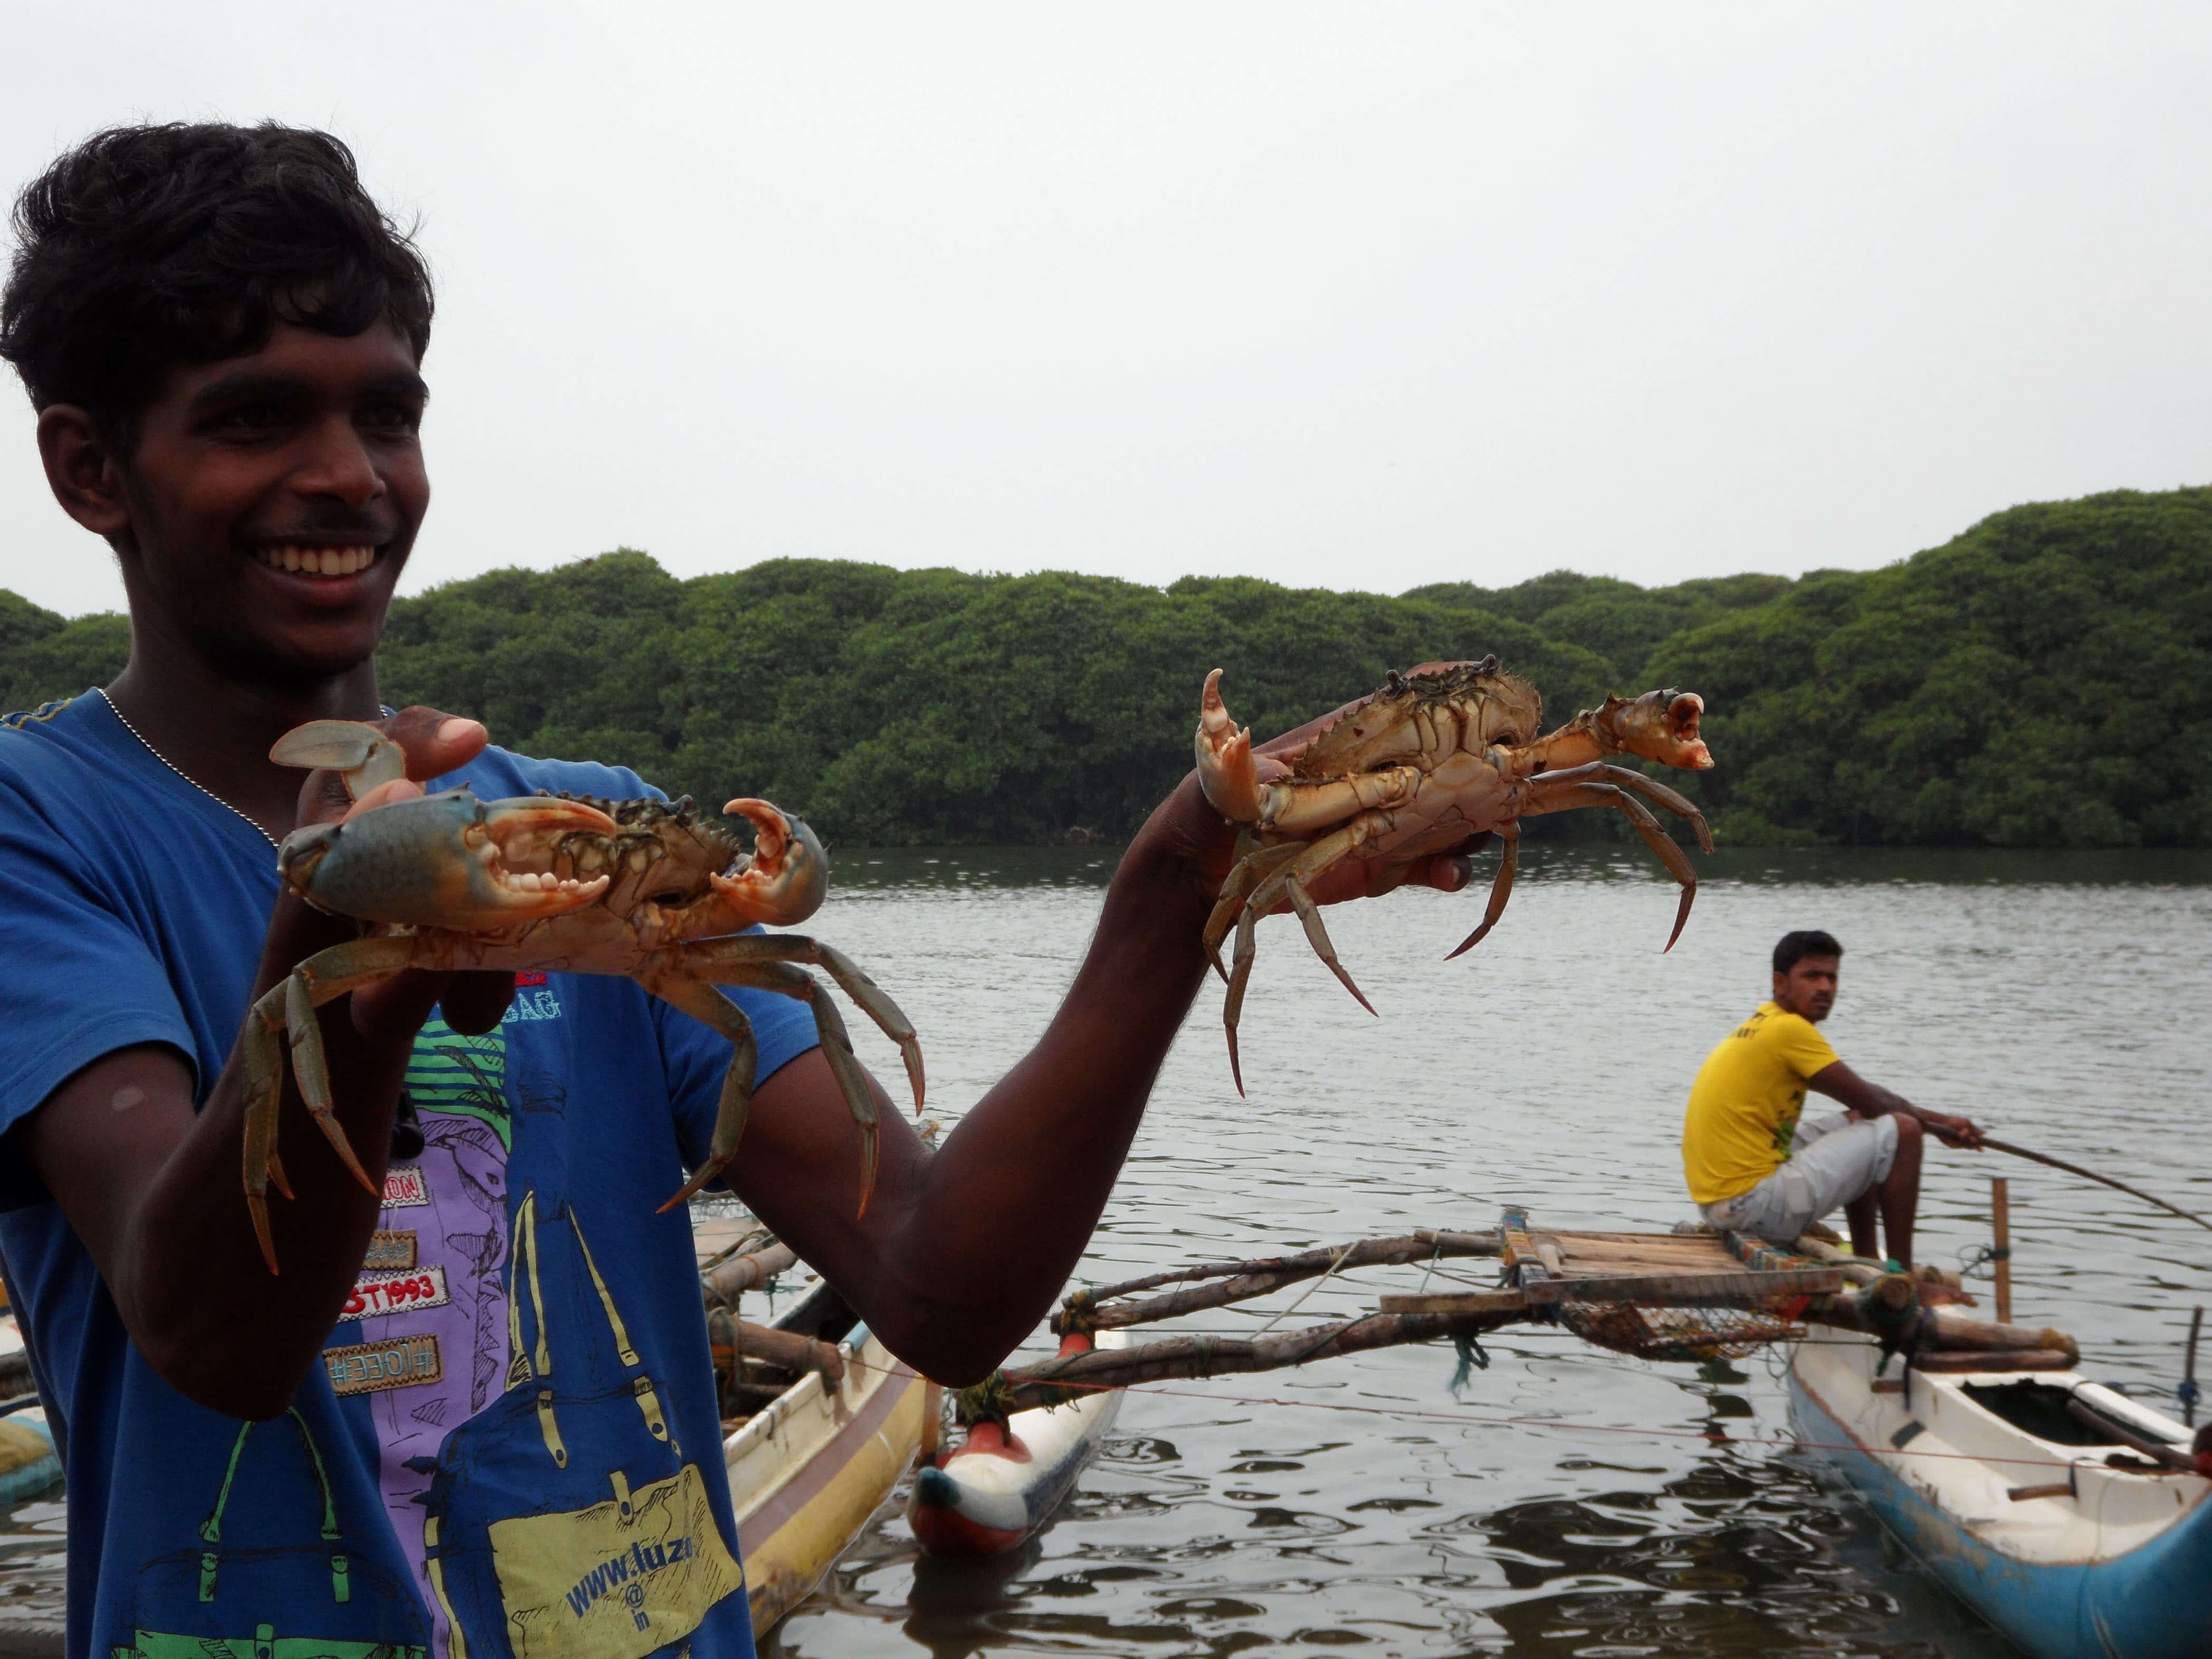 A scene of catching crabs in Bentota river which have spreaded diversity   